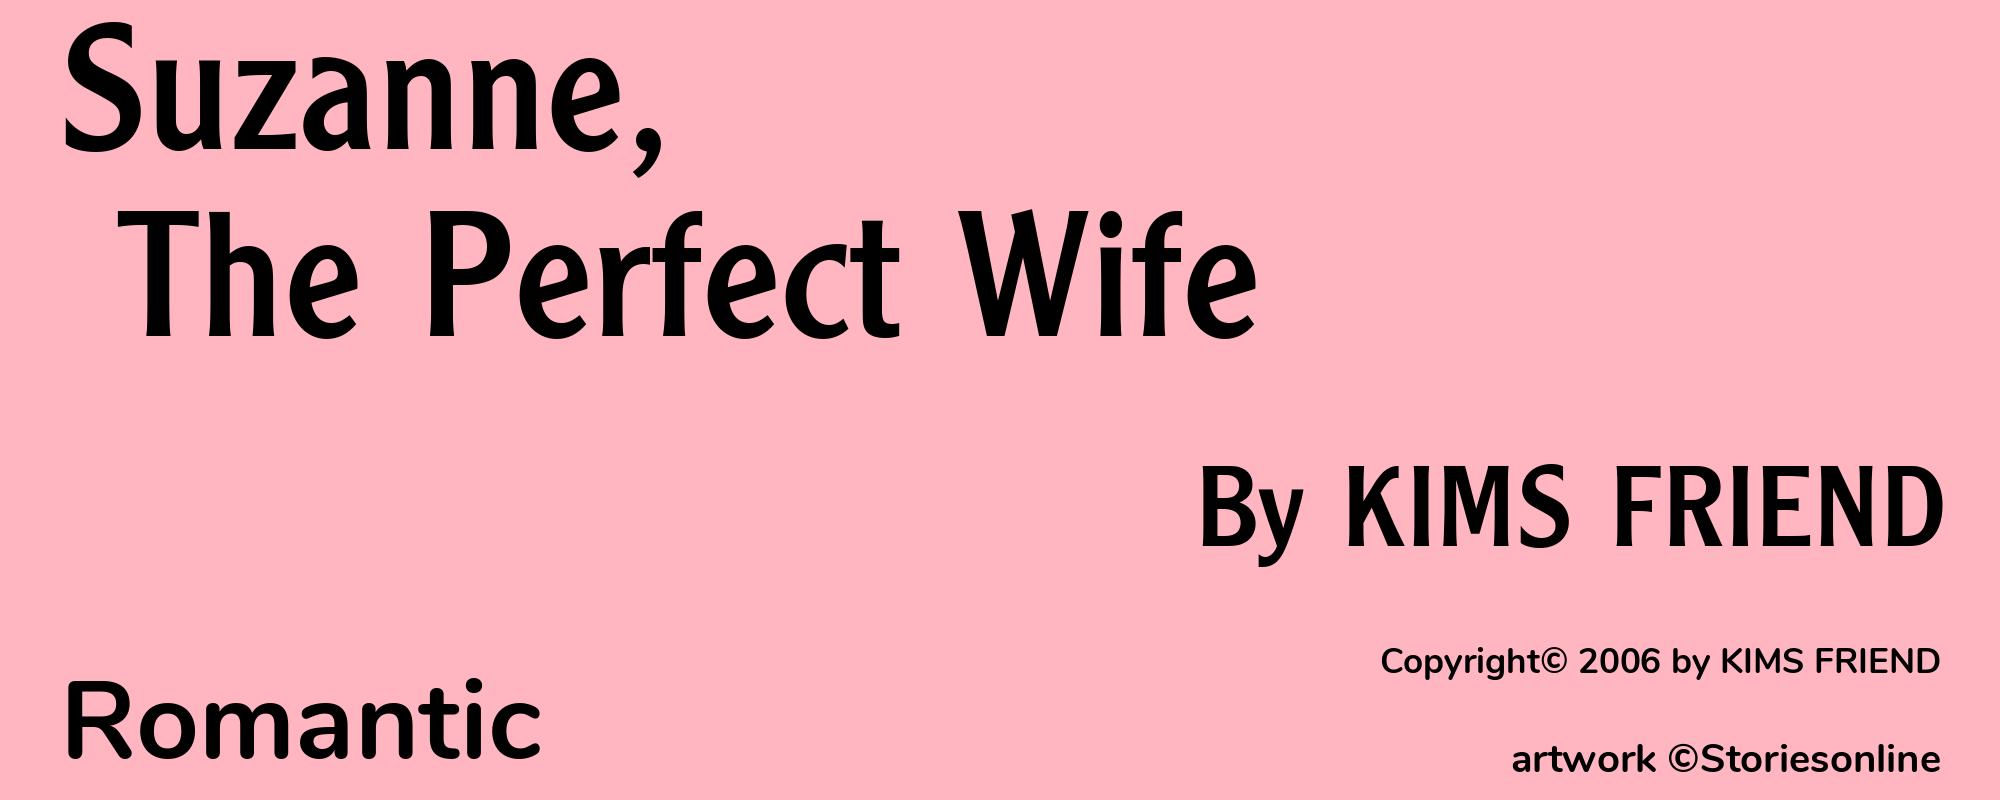 Suzanne, The Perfect Wife - Cover